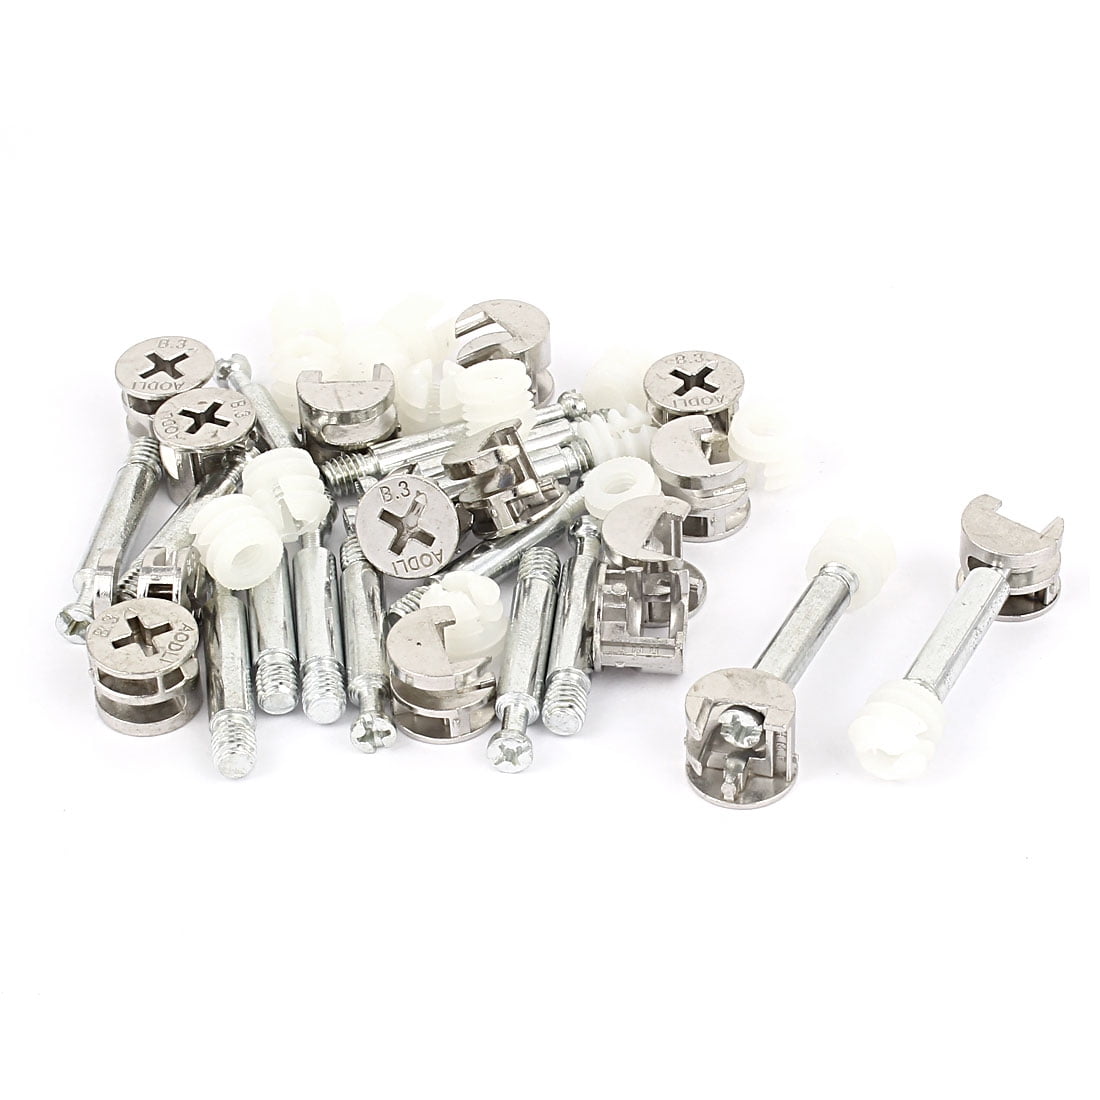 uxcell Furniture Connecting Fitting 6mm Dia Thread Bolts Dowels Screws 15 Pcs